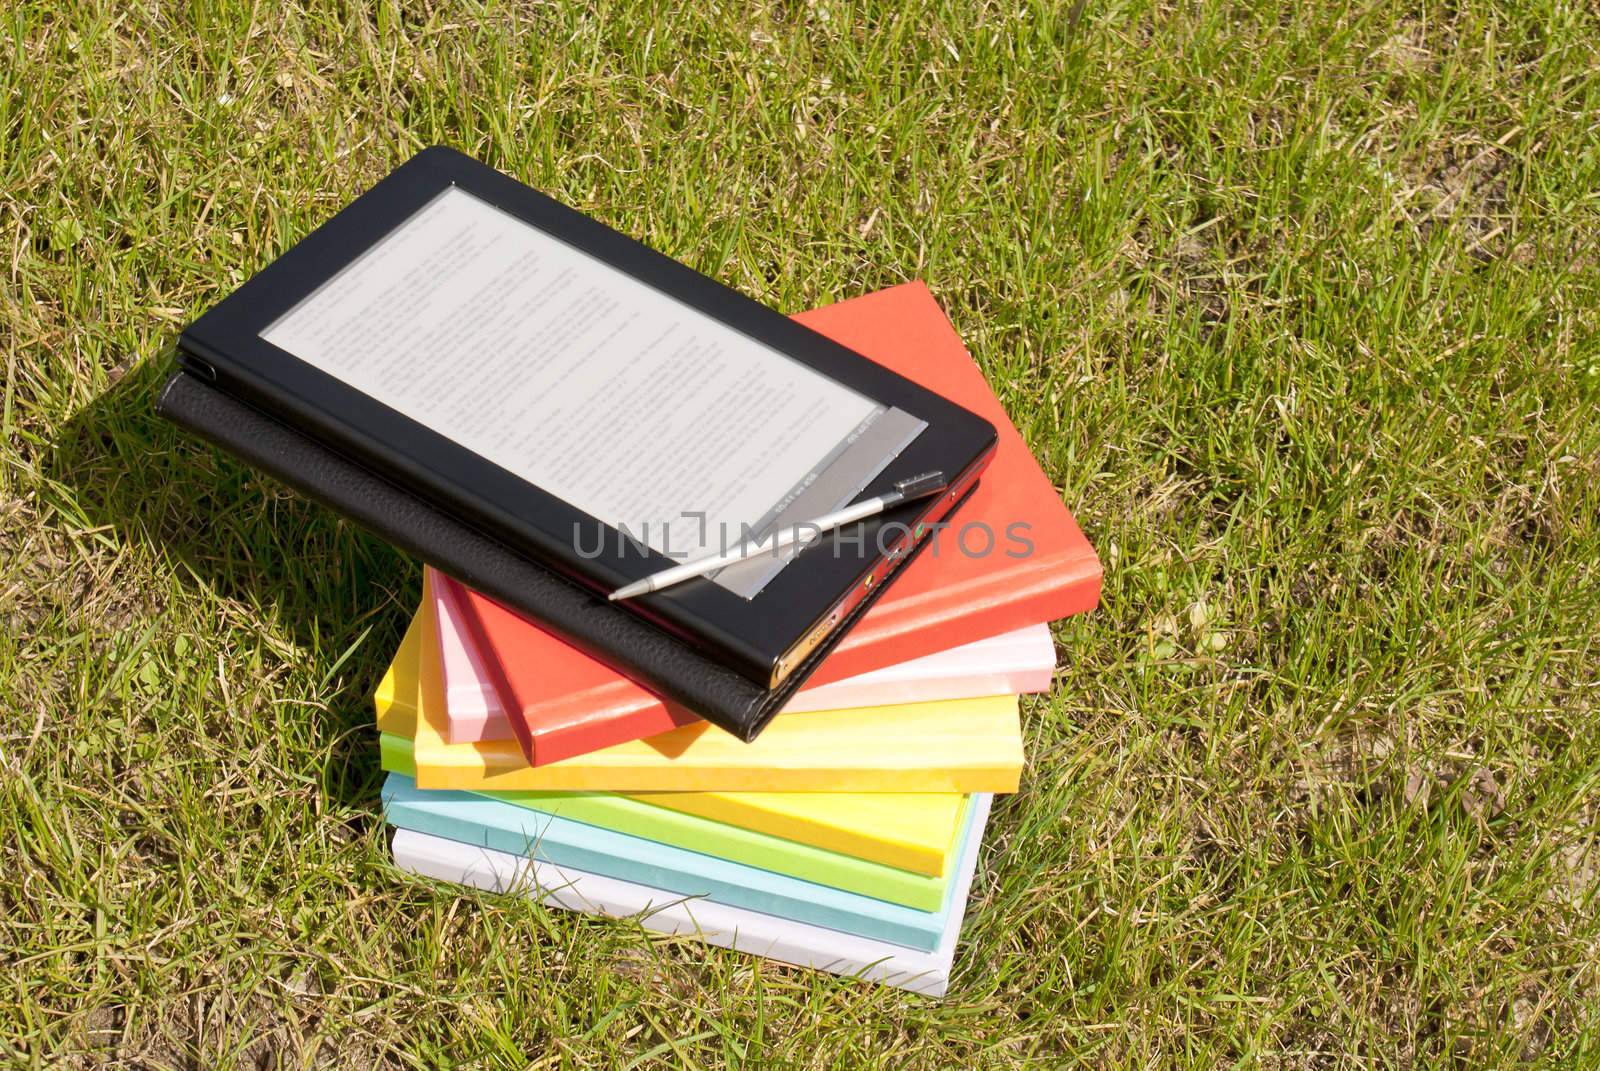 Ebook reader with a stack of books